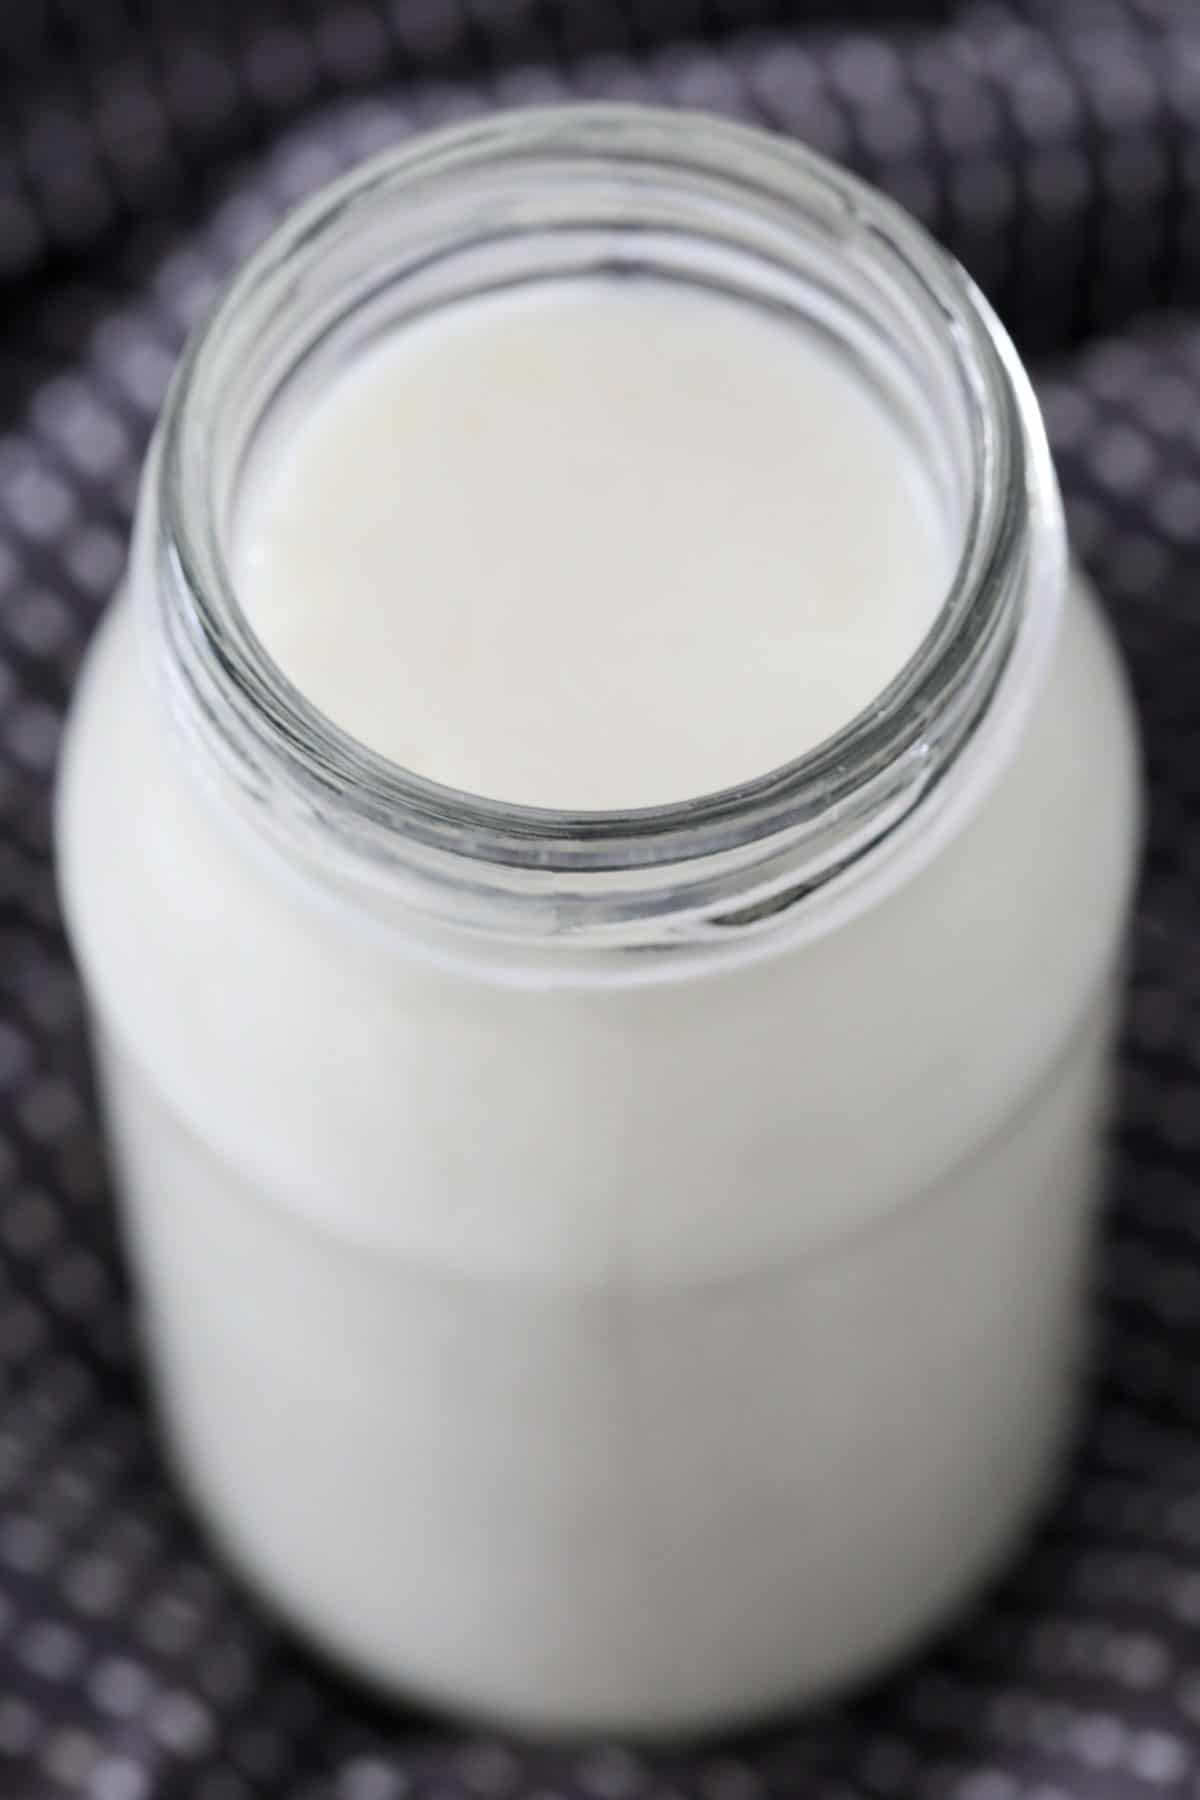 A shot looking into a small bottle filled with cultured milk.